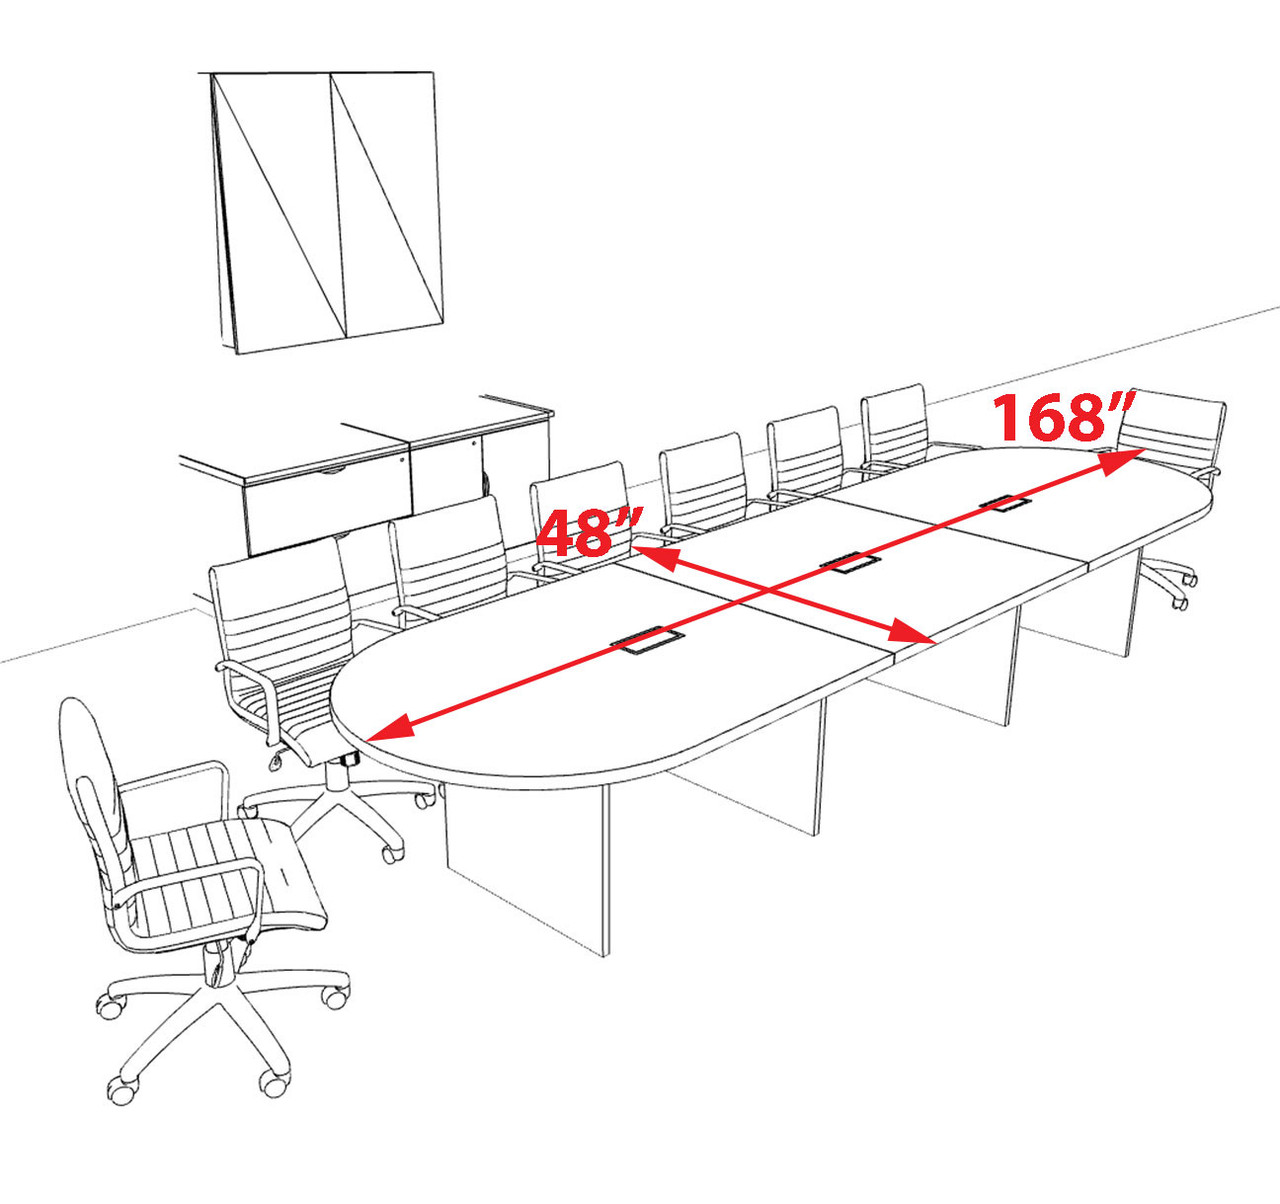 Modern Racetrack 14' Feet Conference Table, #OF-CON-CR23